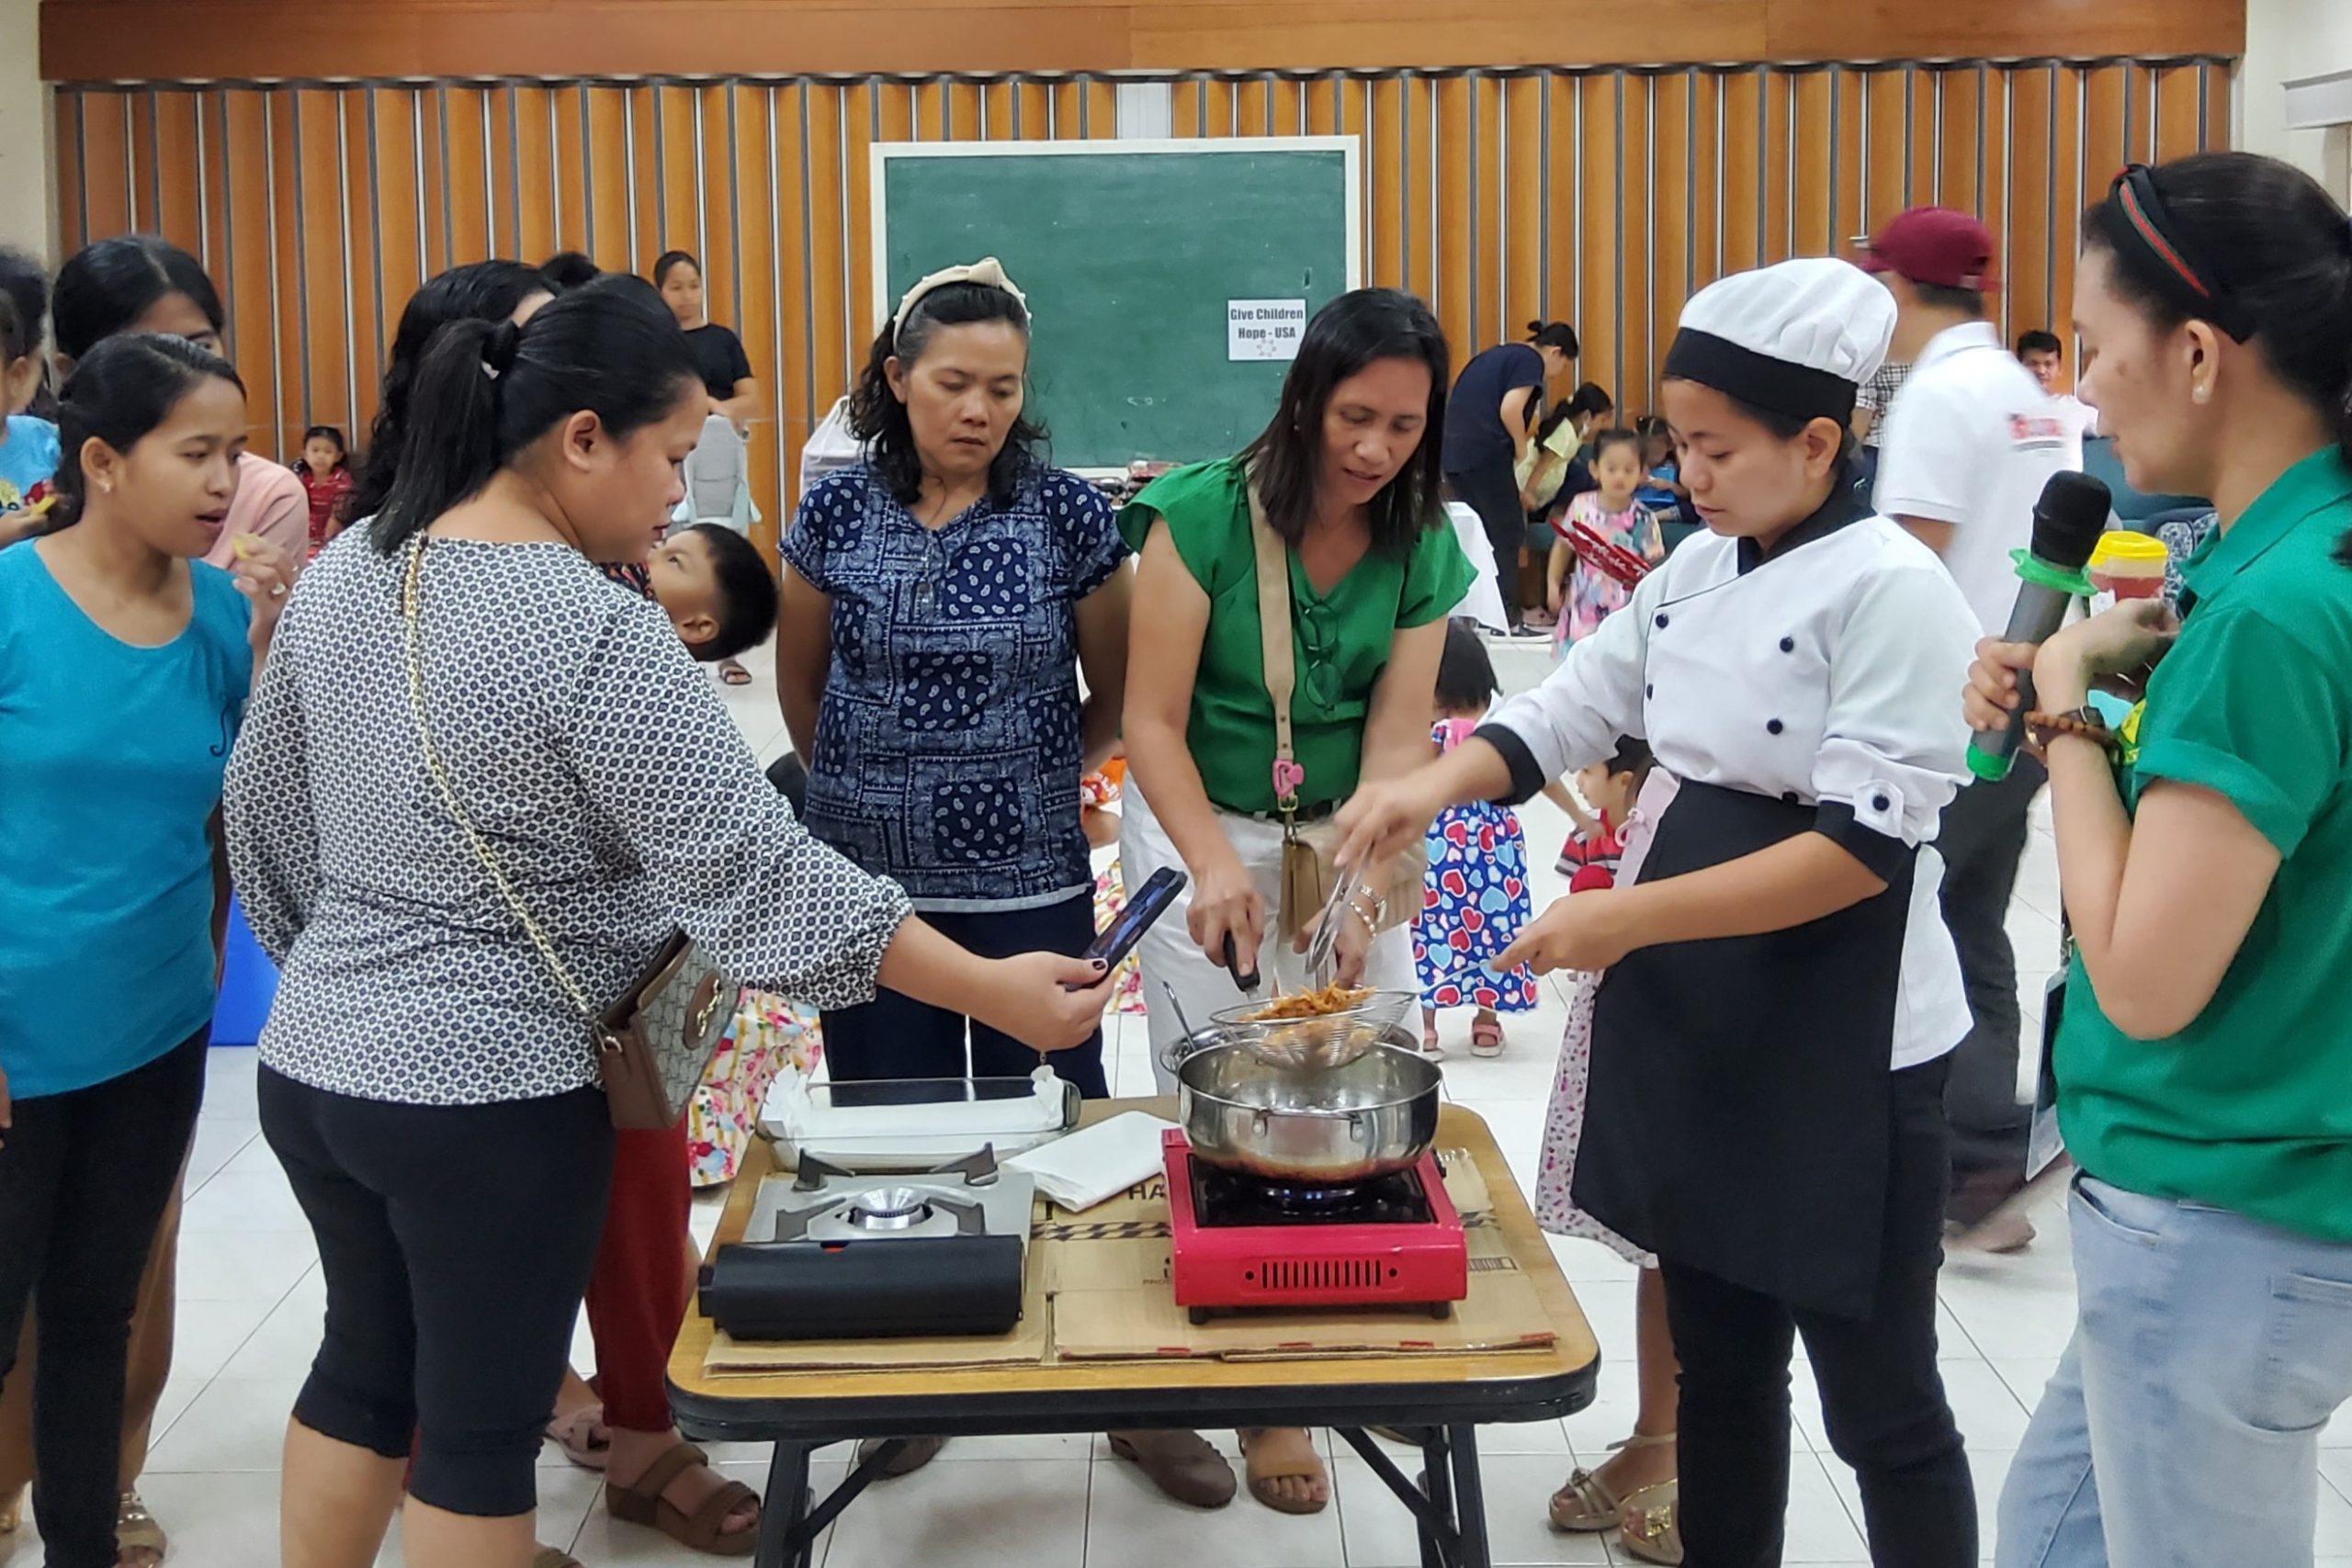 OAC EMPOWERS COMMUNITY WITH HEALTHY FOOD COOKING DEMO FOR CHILD NUTRITION